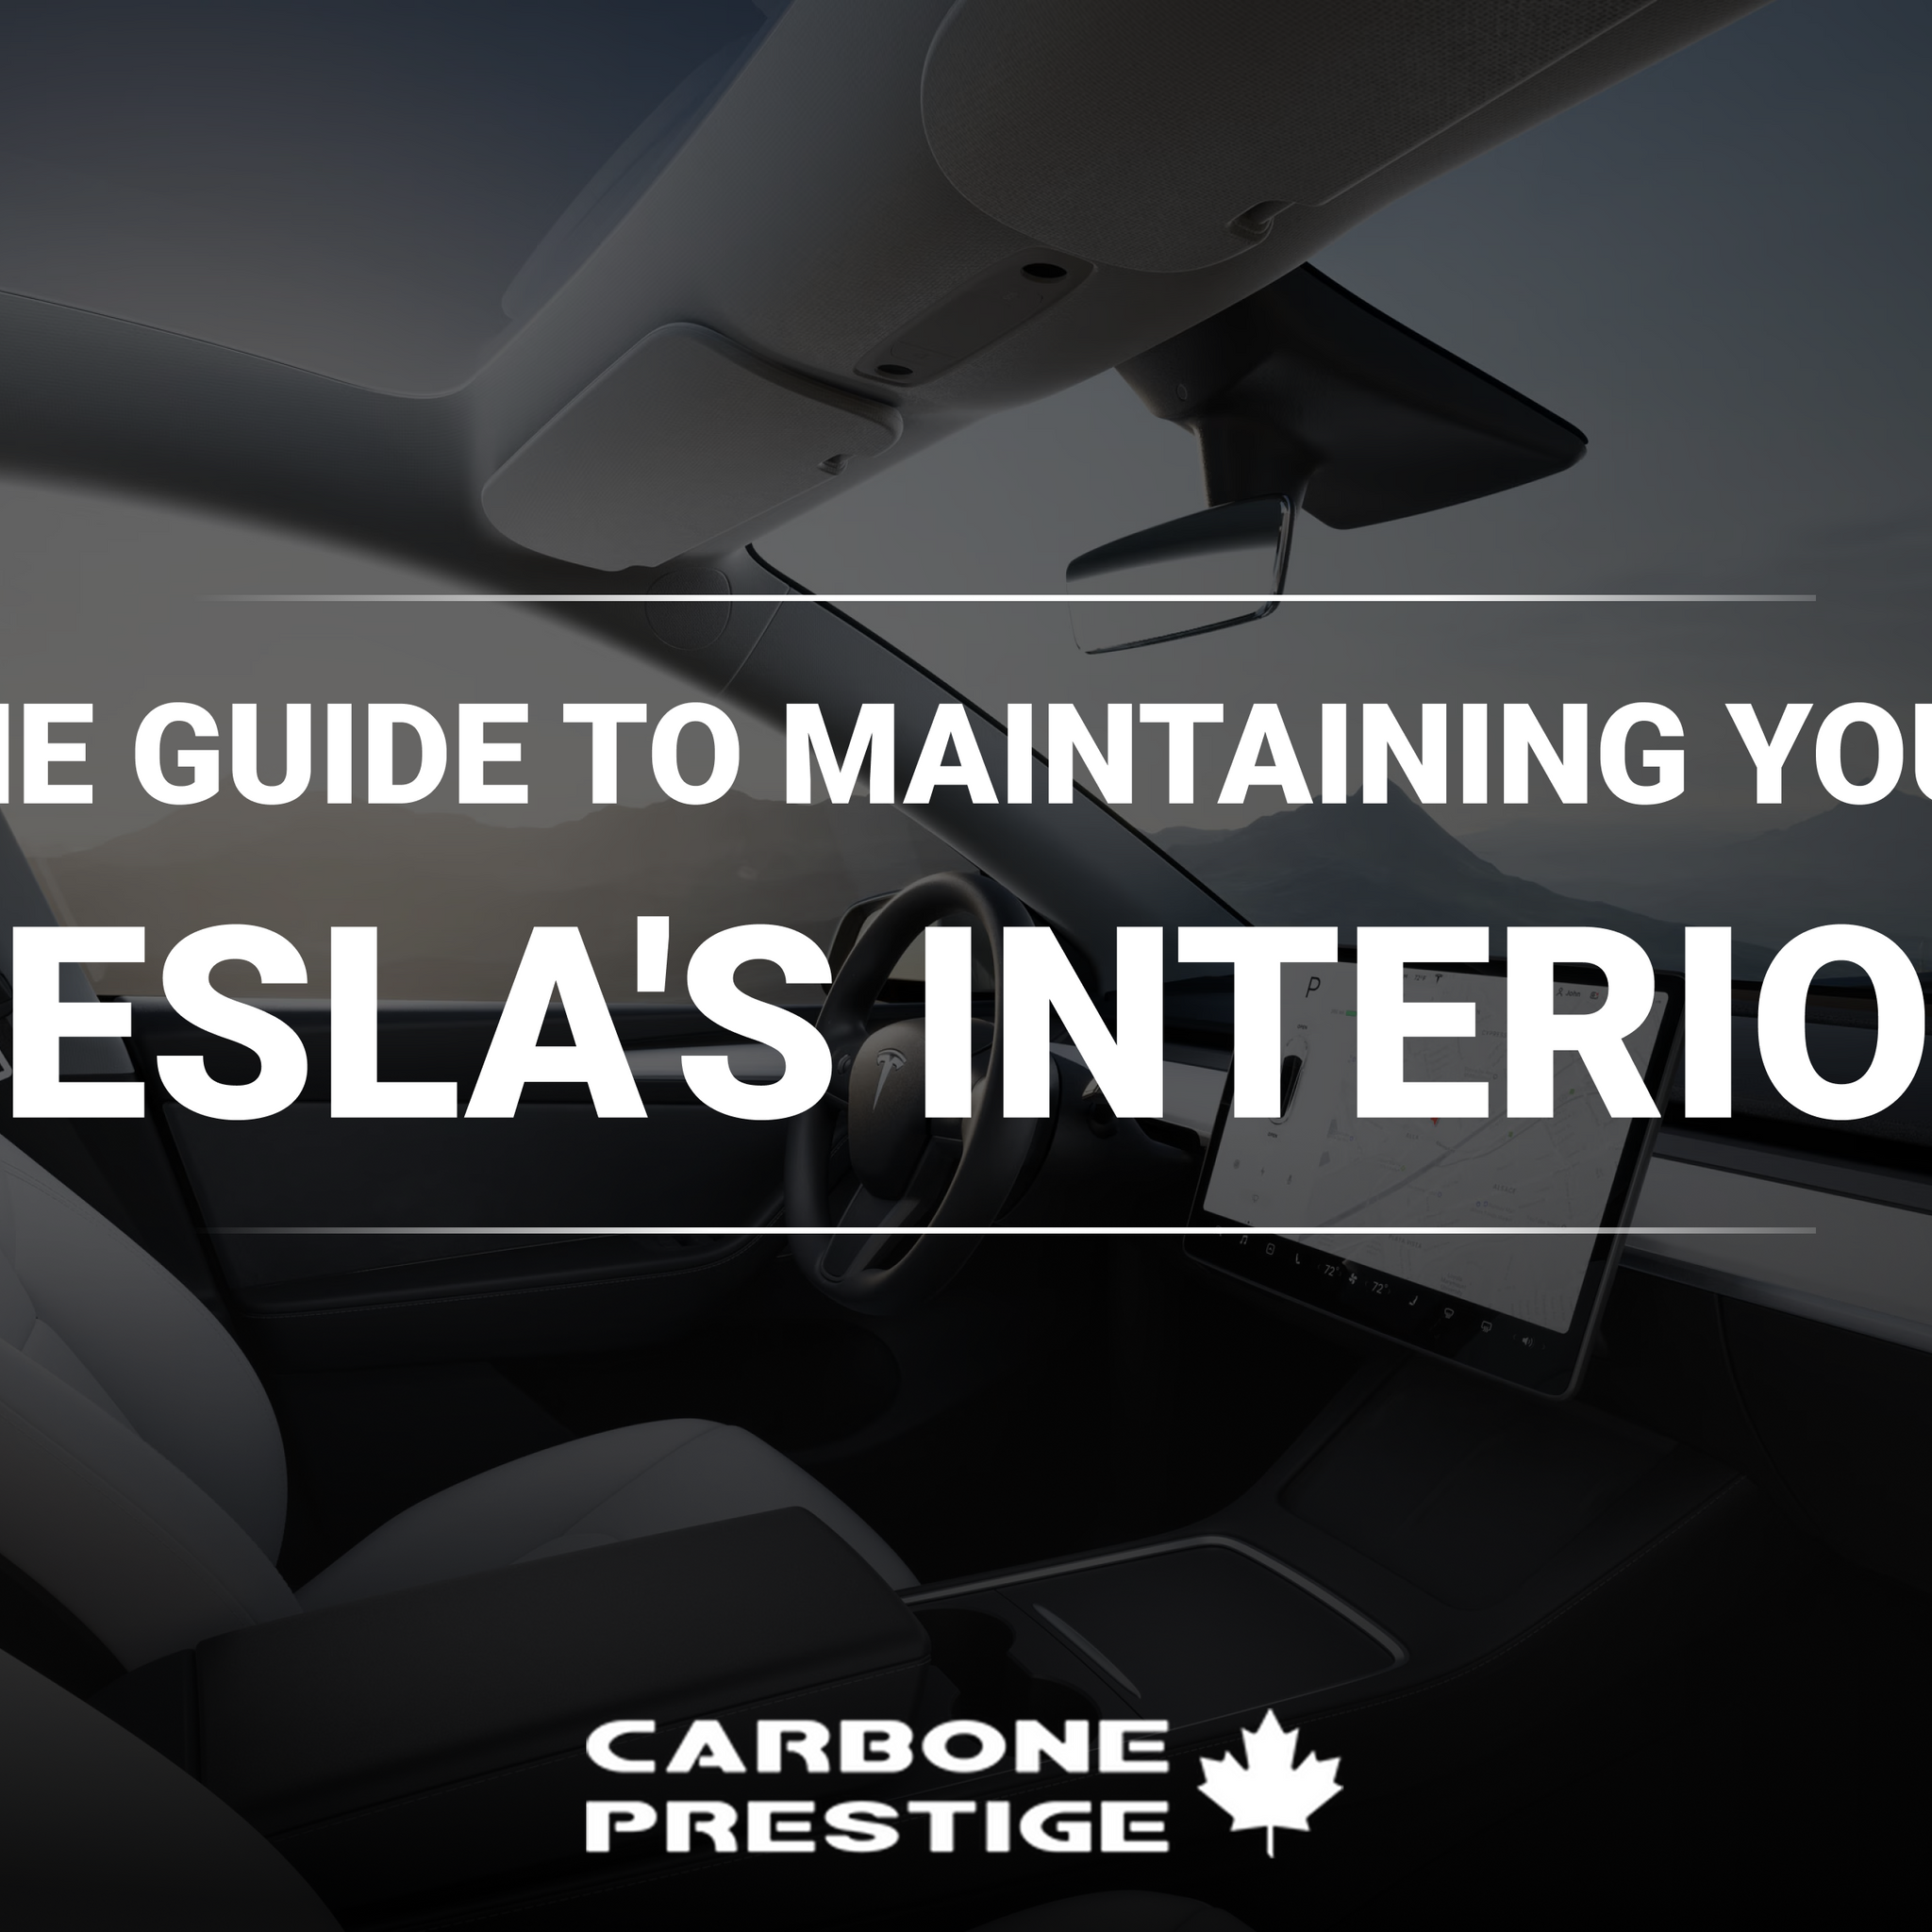 The Guide to Maintaining Your Tesla's Interior: Tips and Must-Have Accessories